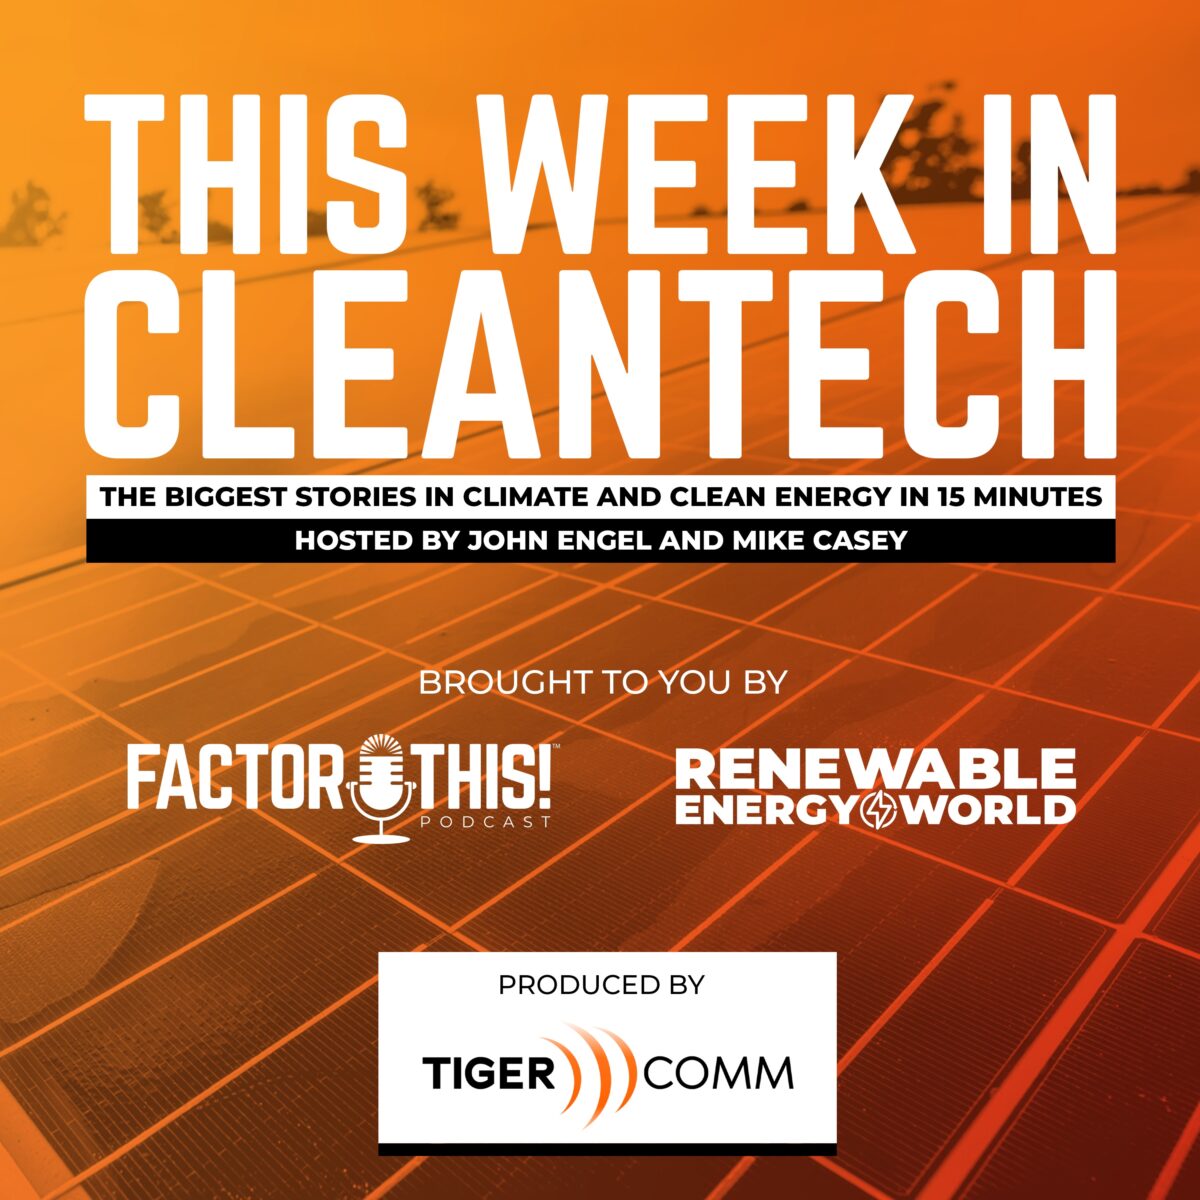 Factor This! podcast expands with weekly cleantech news recap